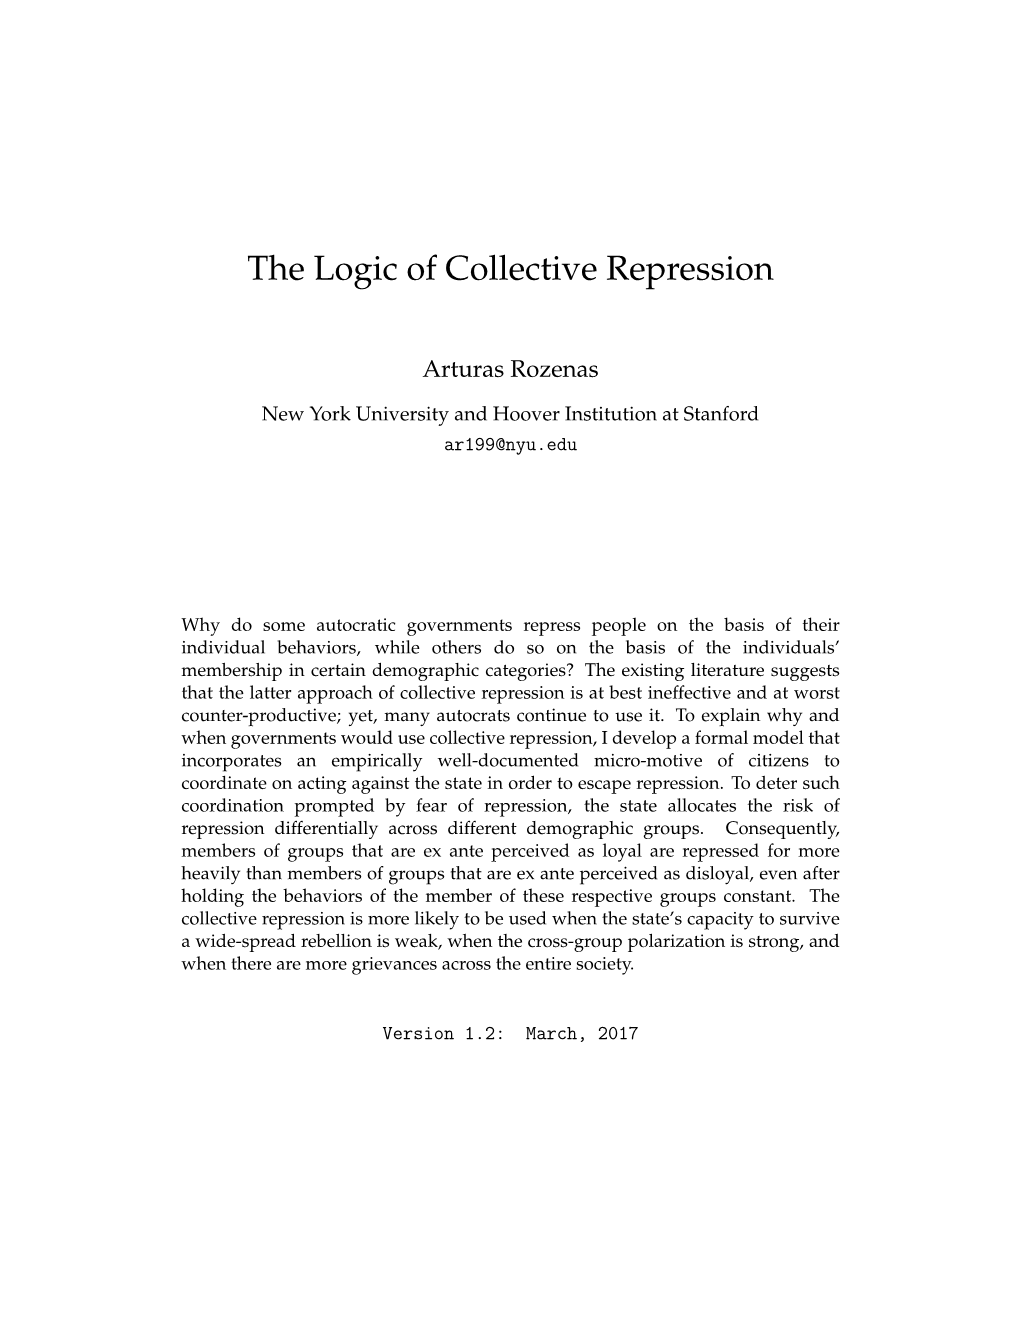 The Logic of Collective Repression